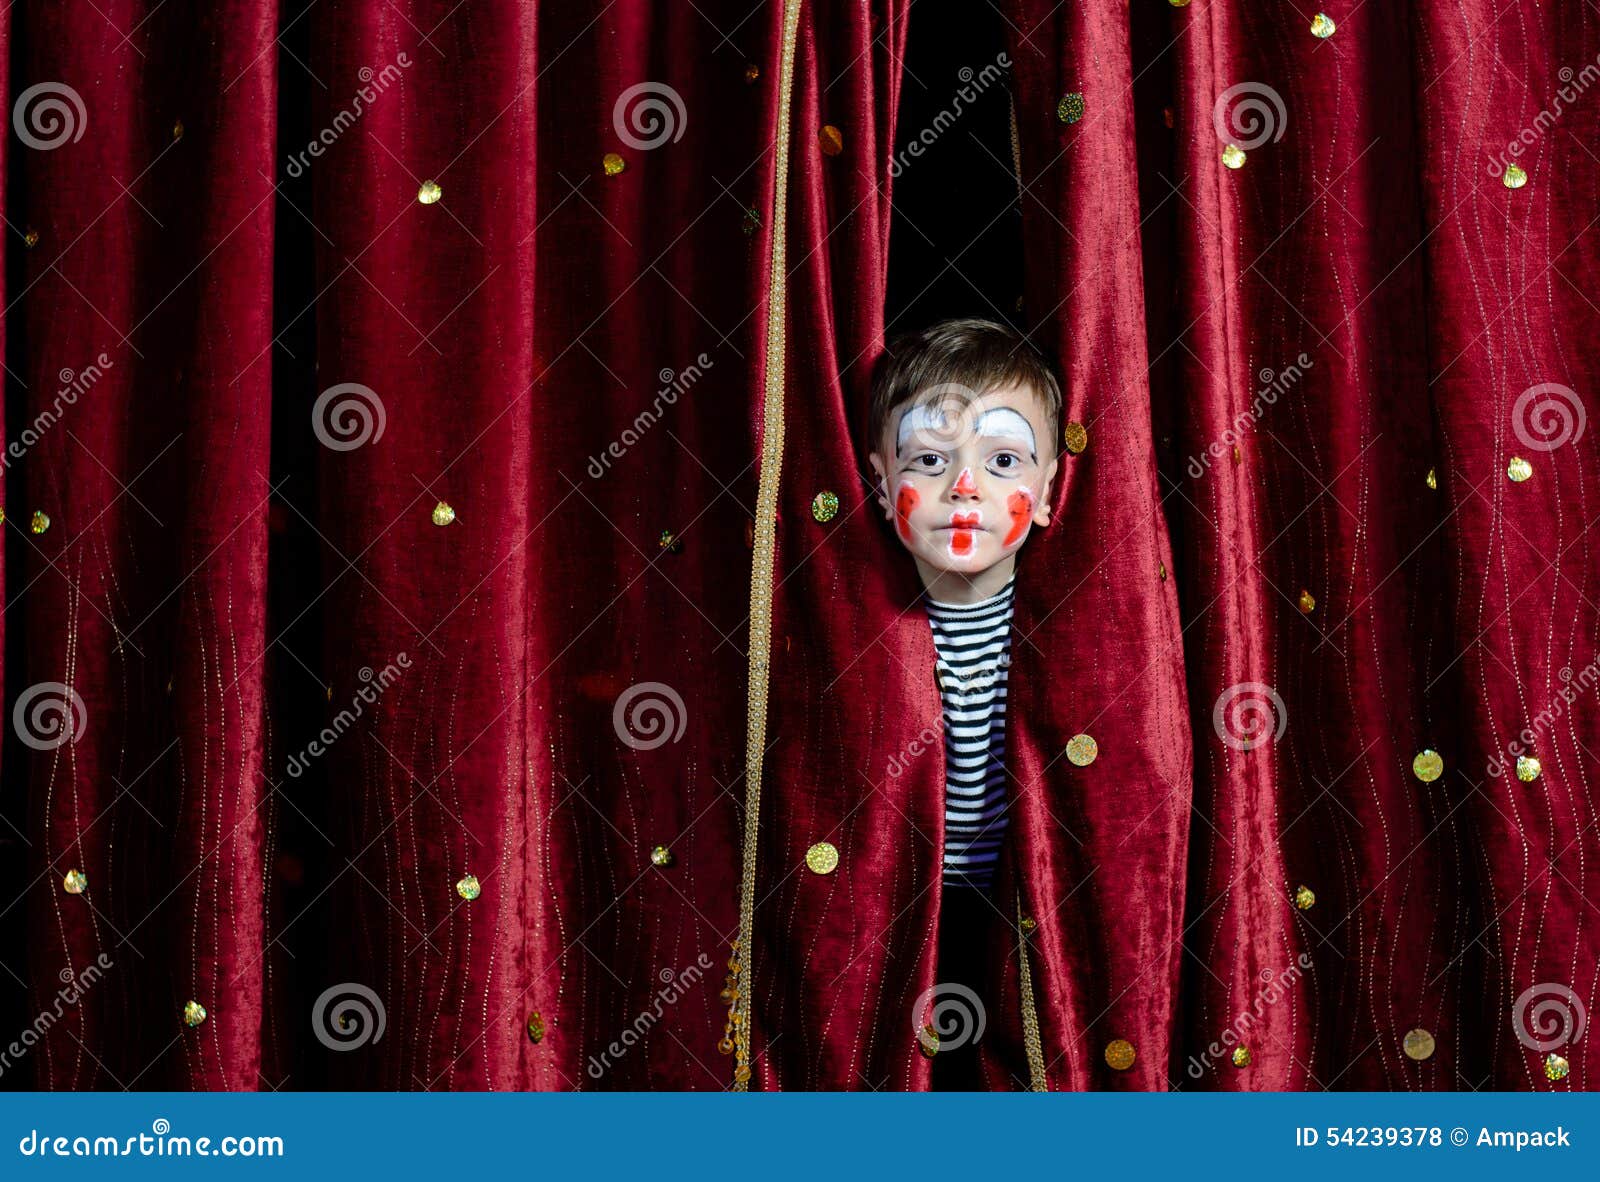 Boy Clown Peering through Stage Curtains Stock Photo - Image of ...